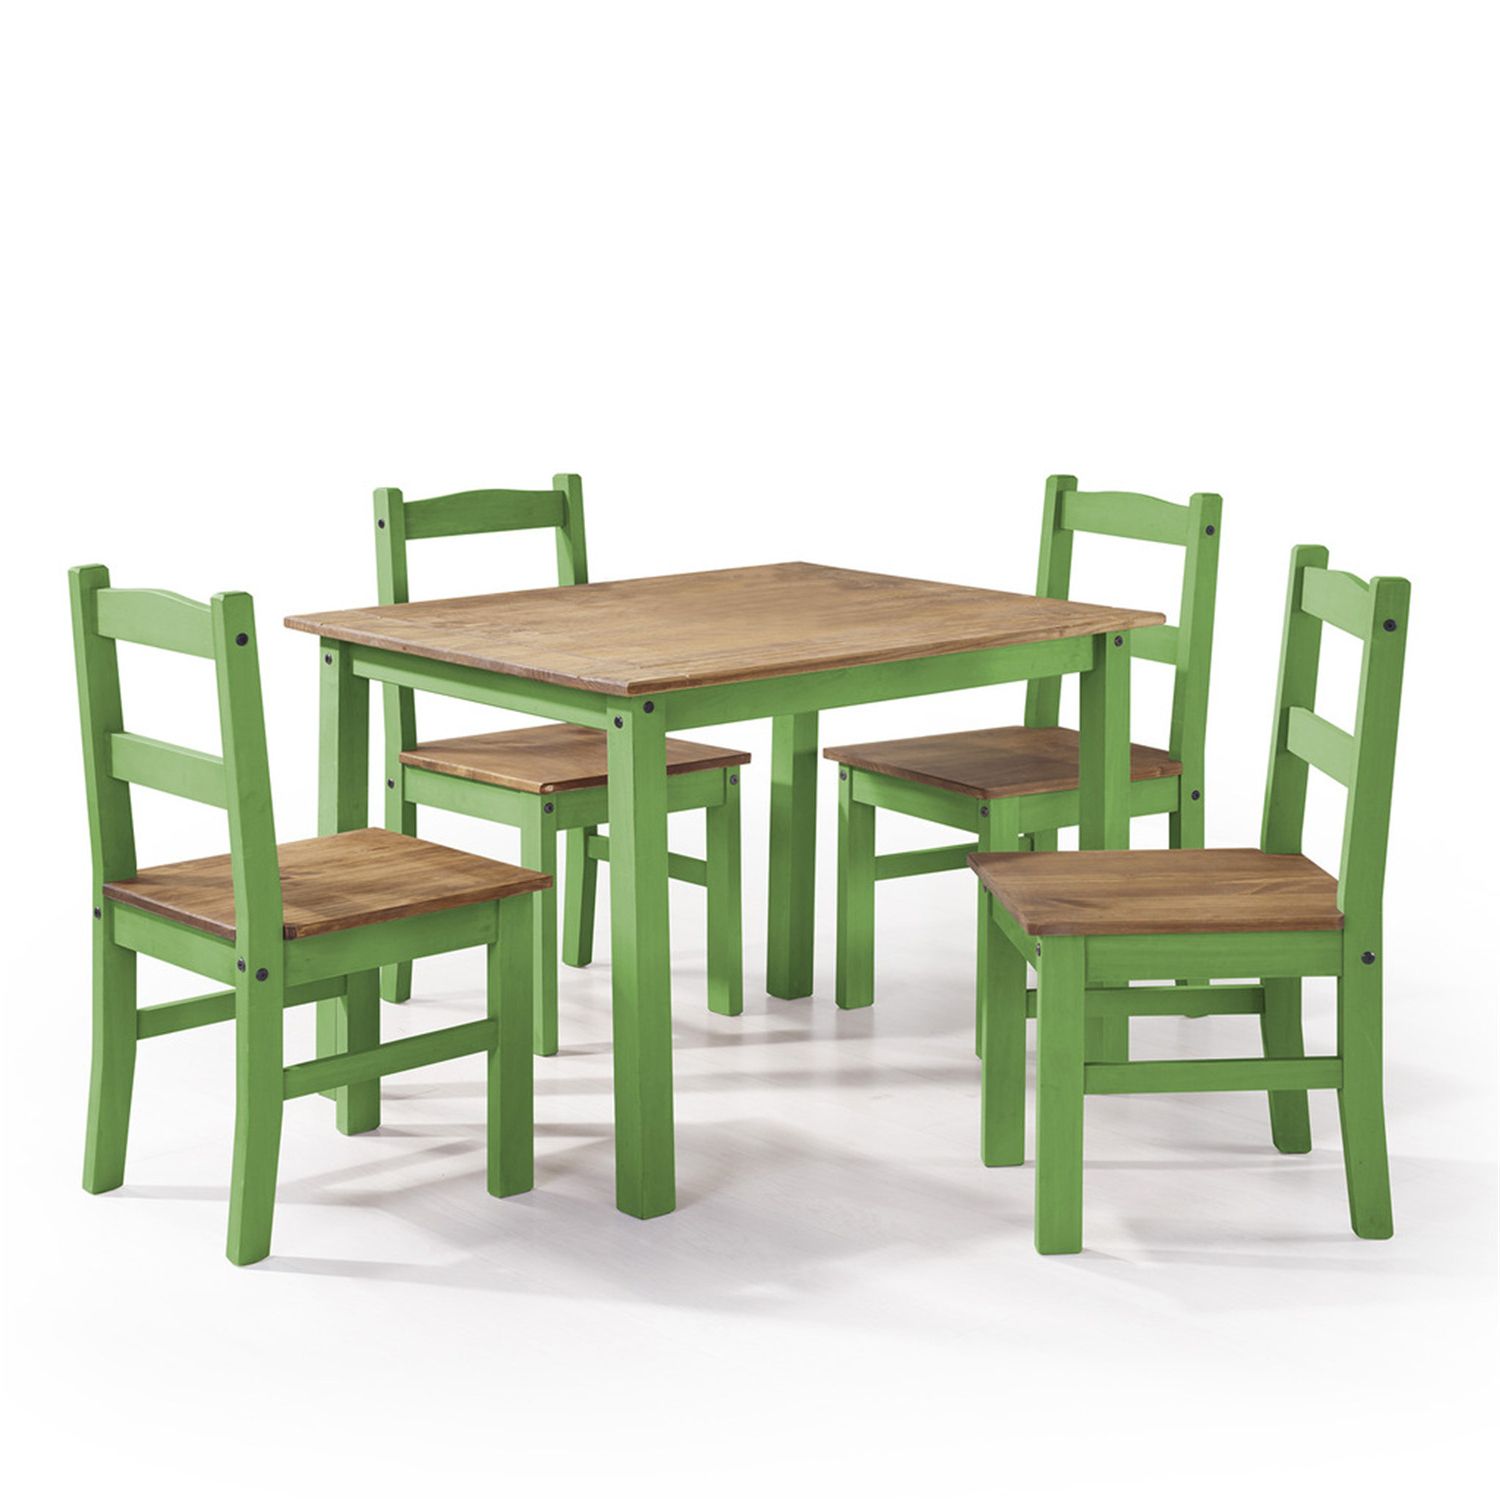 Green 5 Piece Outdoor Dining Sets Within Most Recently Released York 5 Piece Solid Wood Dining Set With 1 Table And 4 Chairs In Green (View 5 of 15)